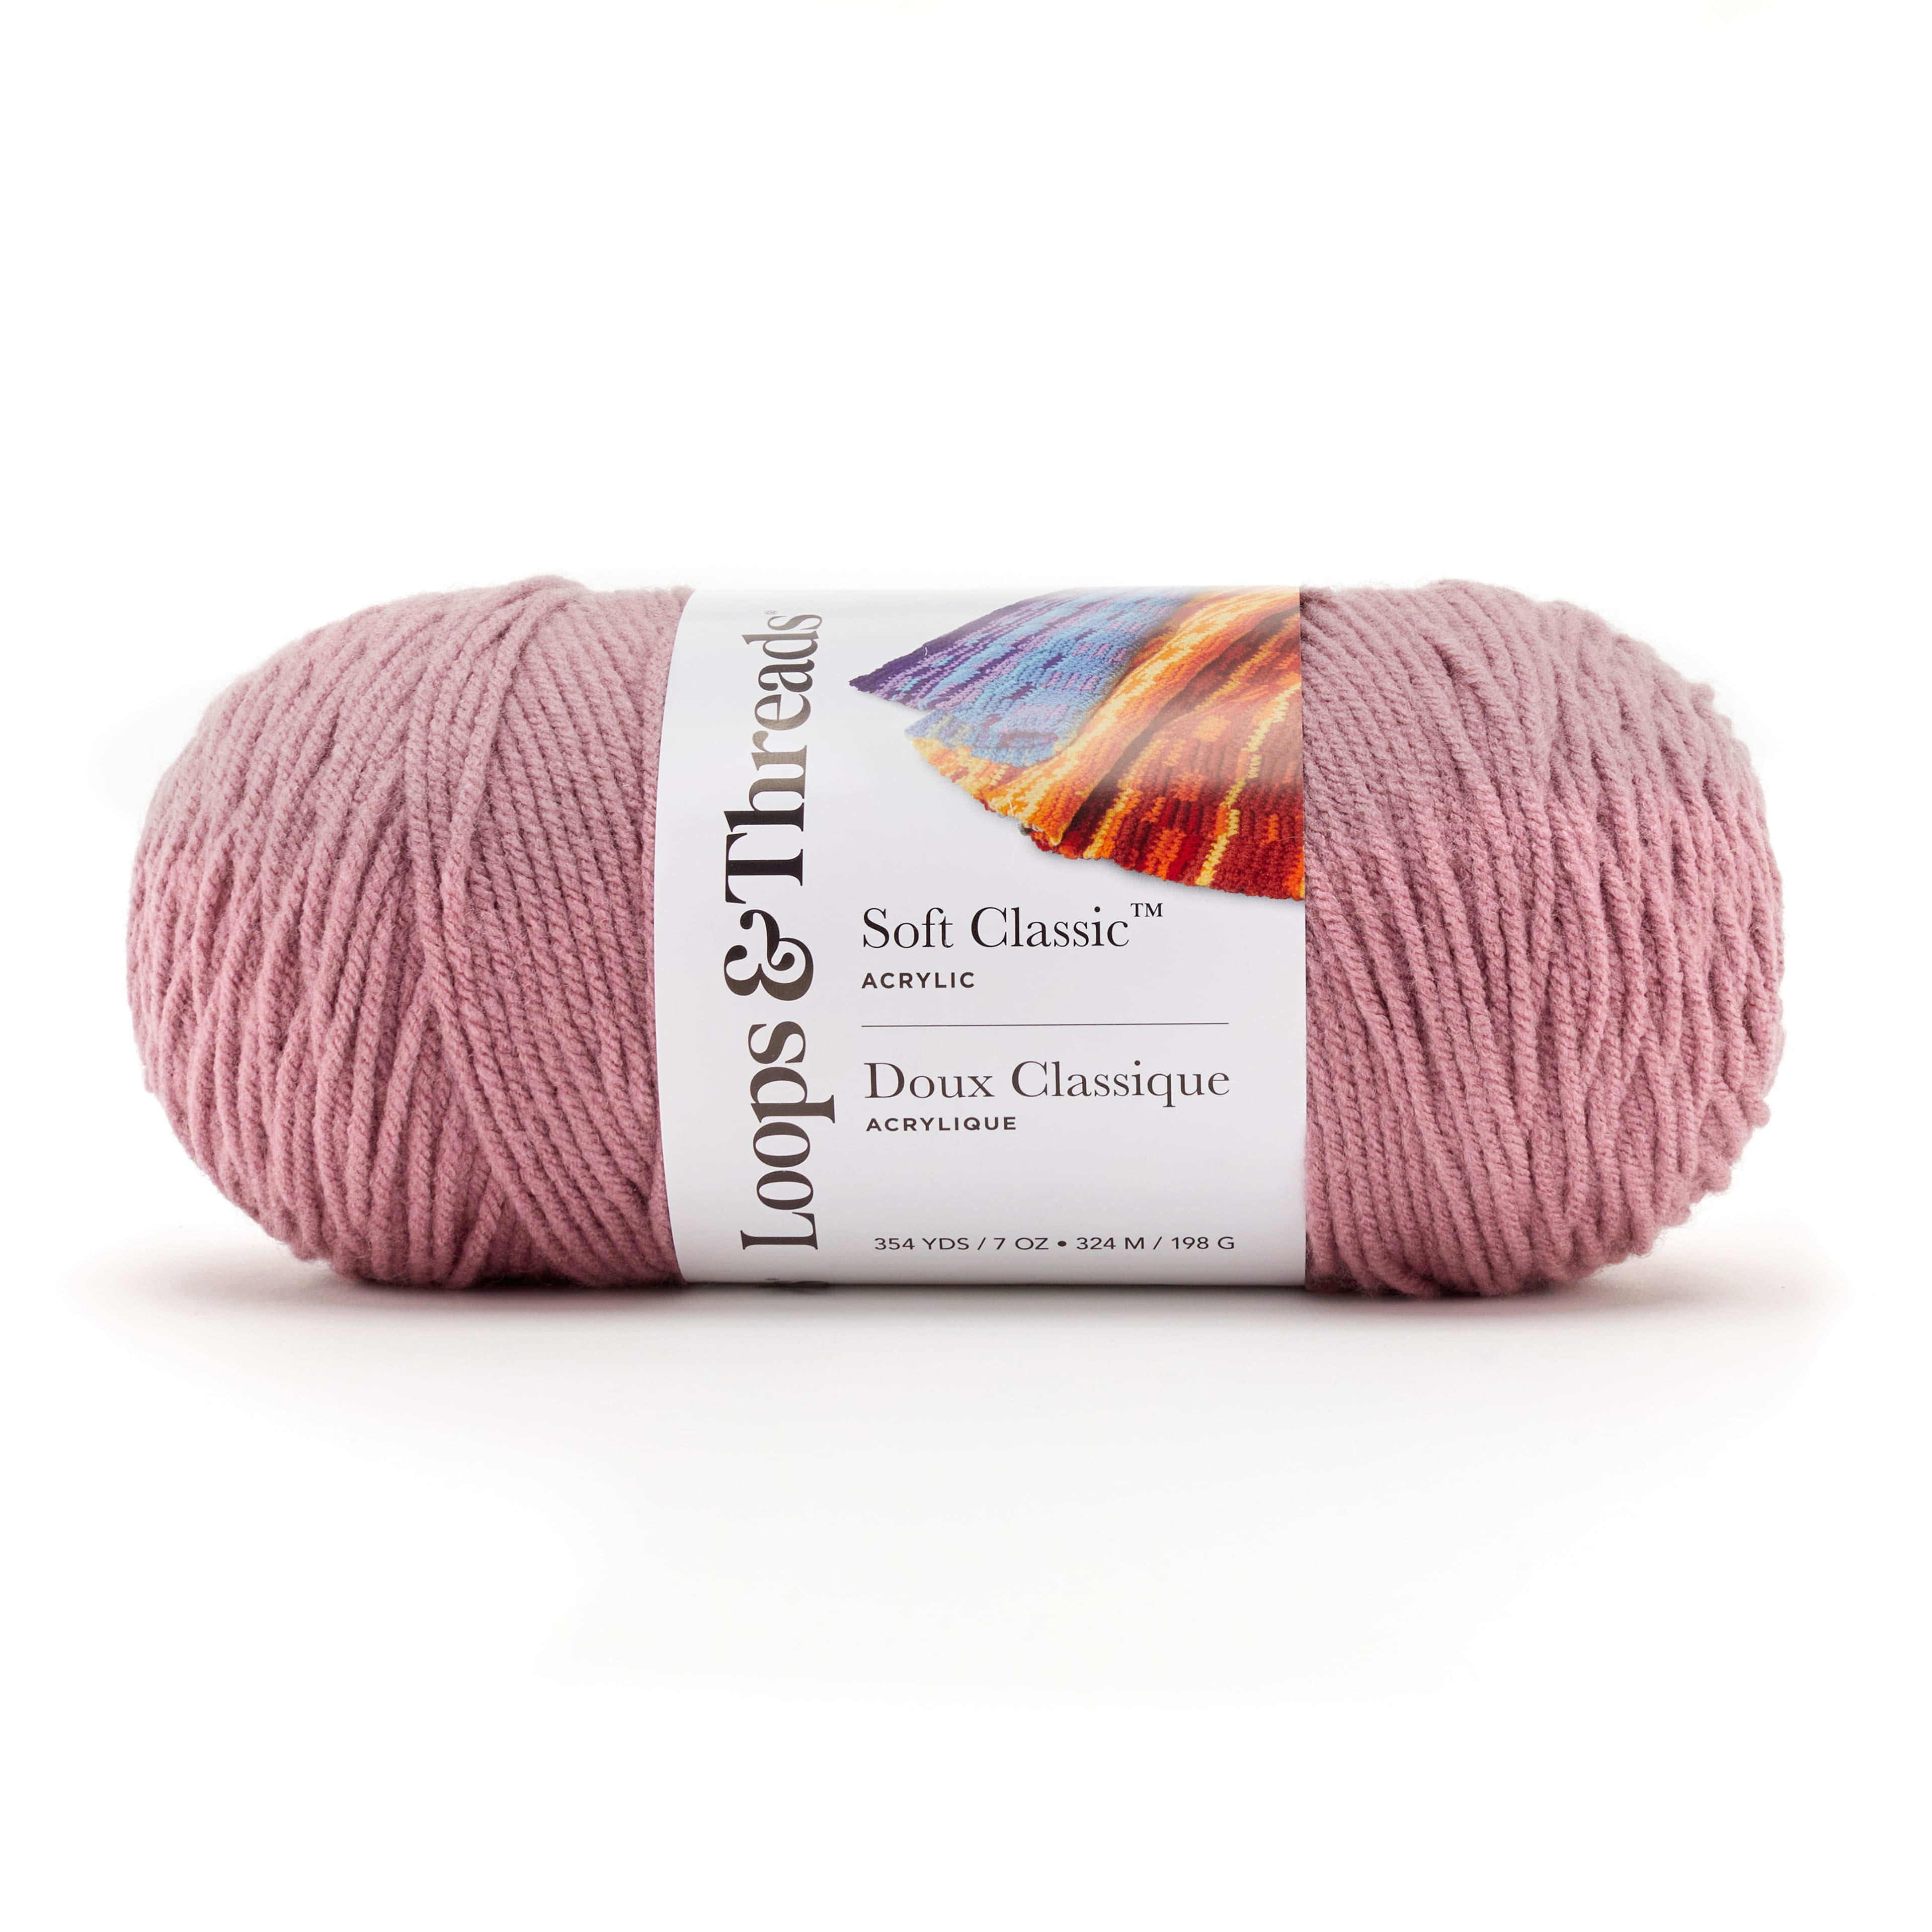 Soft Classic Solid Yarn by Loops & Threads - Solid Color Yarn for Knitting,  Crochet, Weaving, Arts & Crafts - Mauve, Bulk 12 Pack 